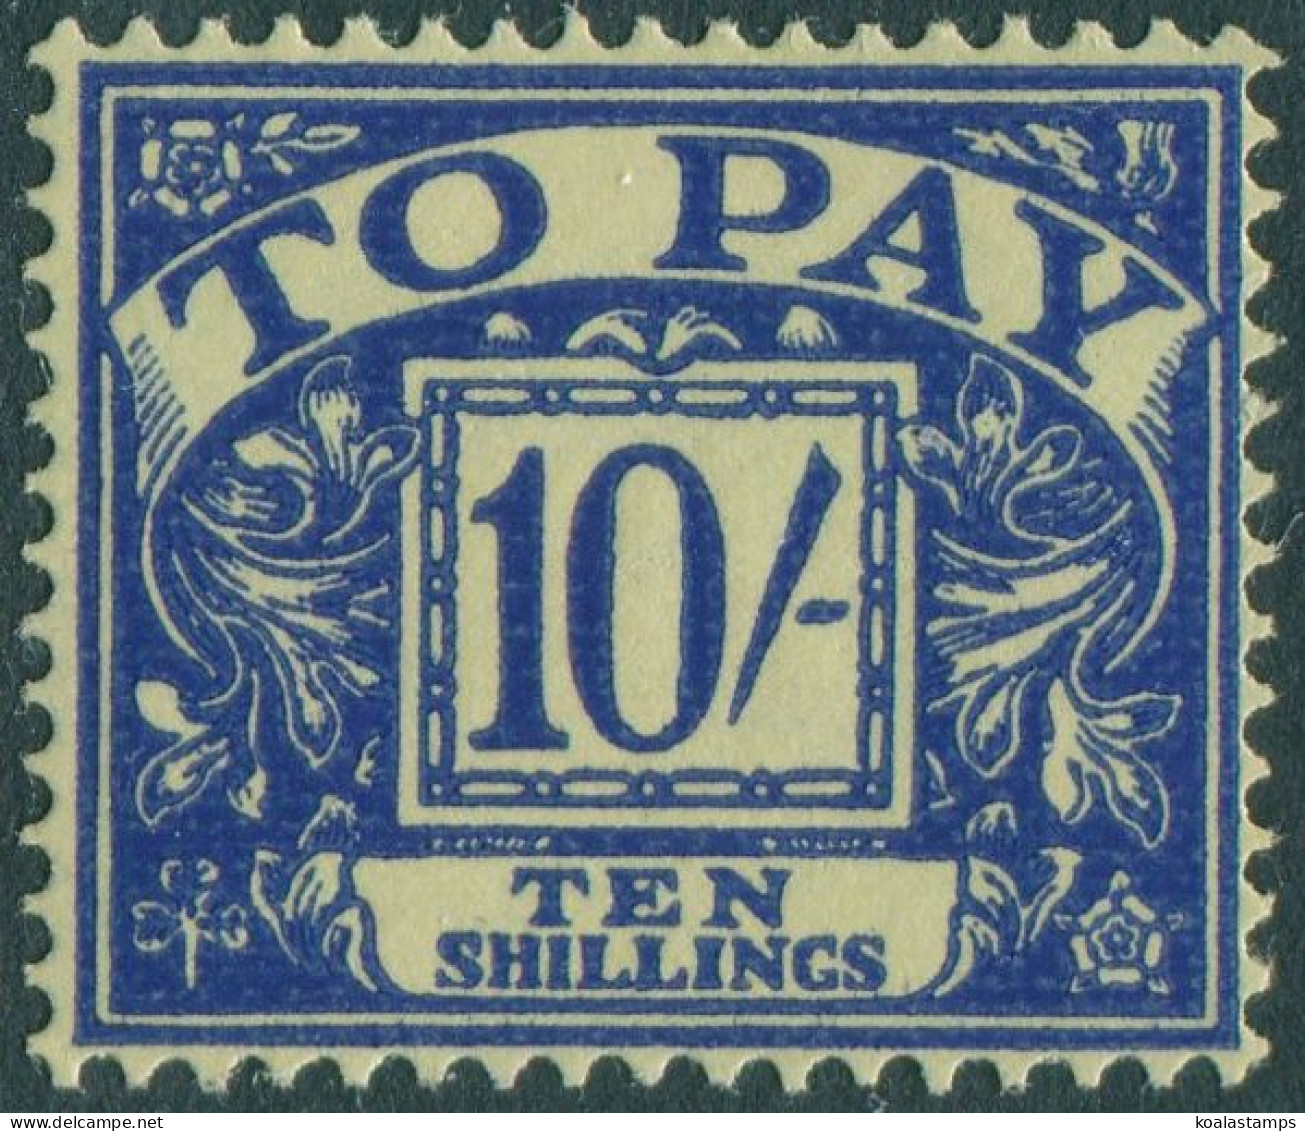 Great Britain Postage Due 1959  SGD67 10/- Blue On Yellow MLH - Unclassified